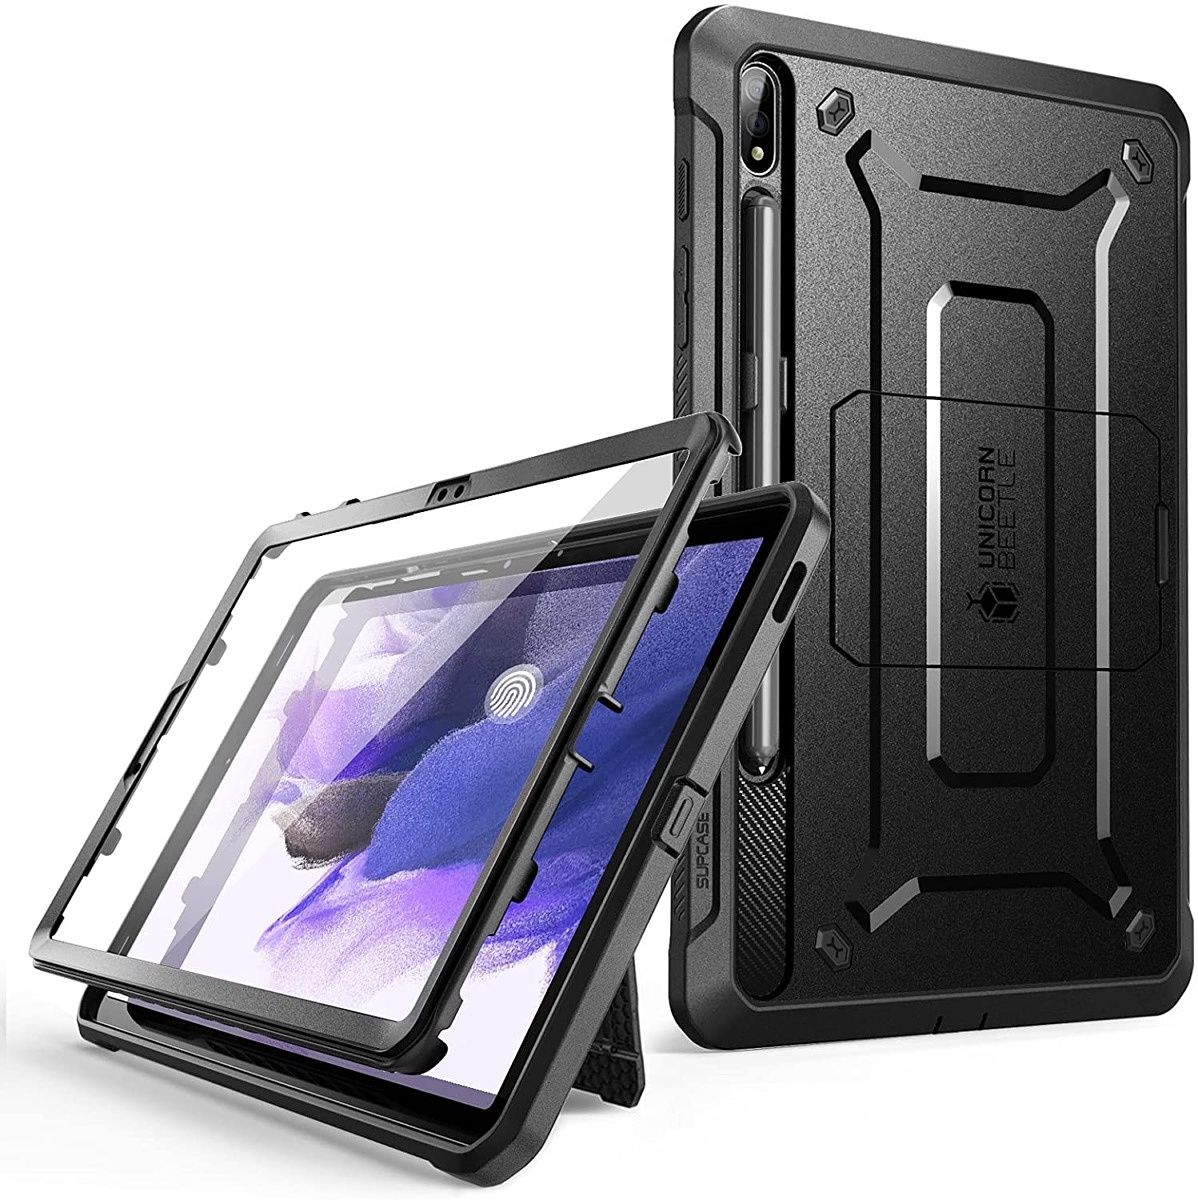 If you're looking for the best protection for your tablet, this is the case to go for. It even has a built-in screen protector and a kickstand.